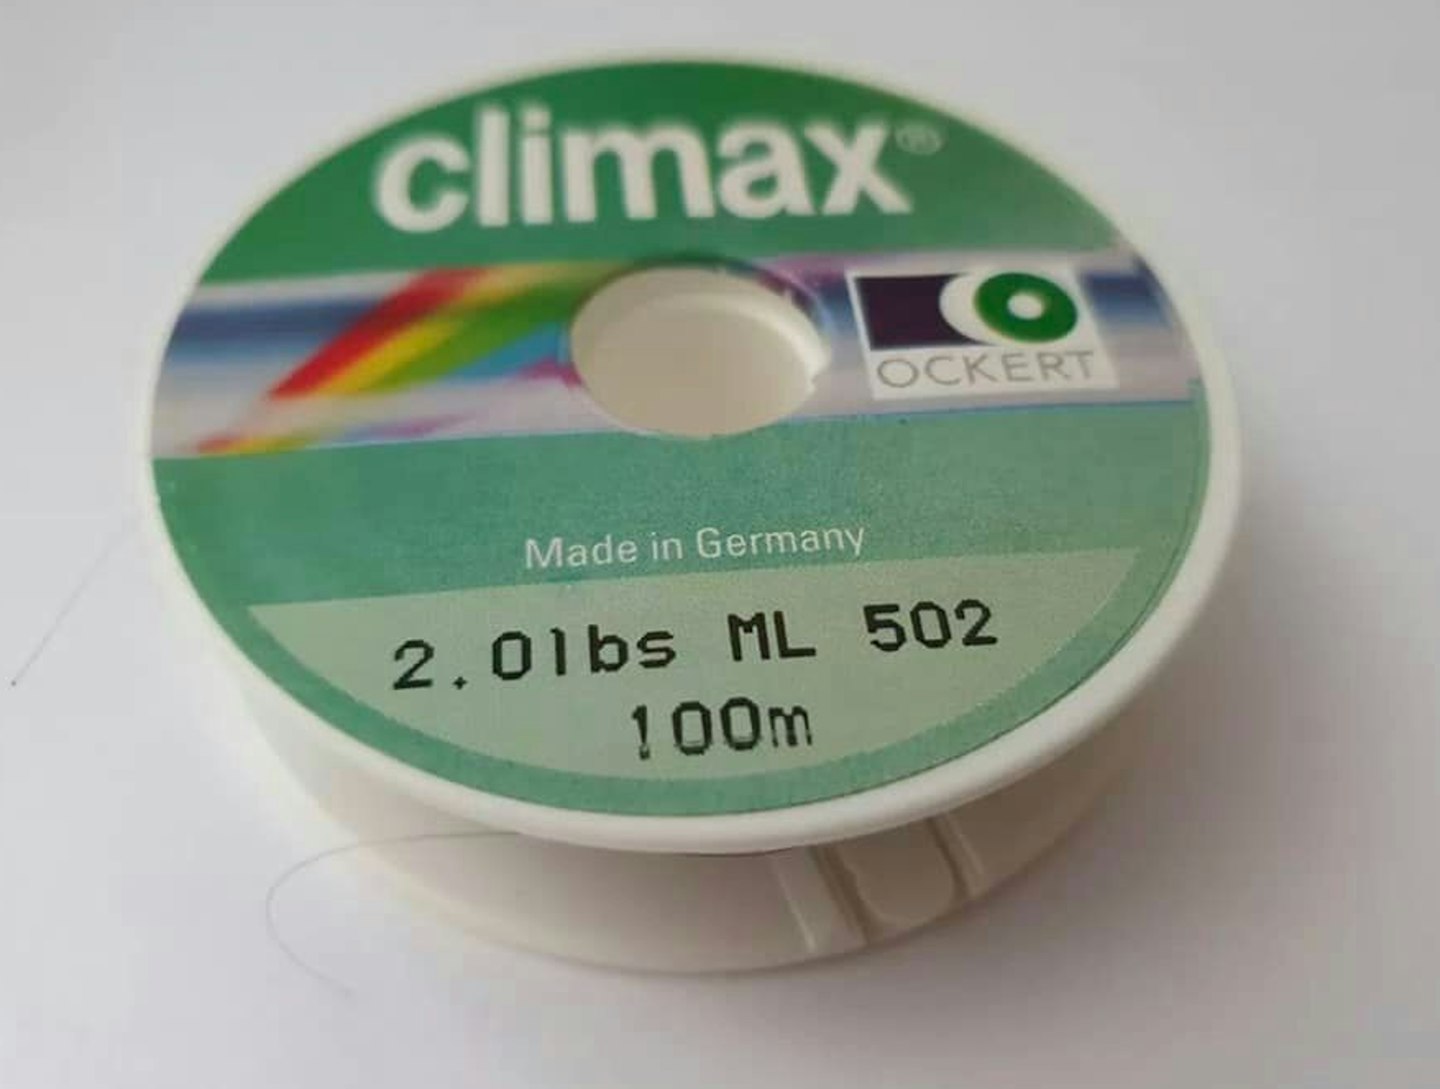 Climax line was known for its fragility